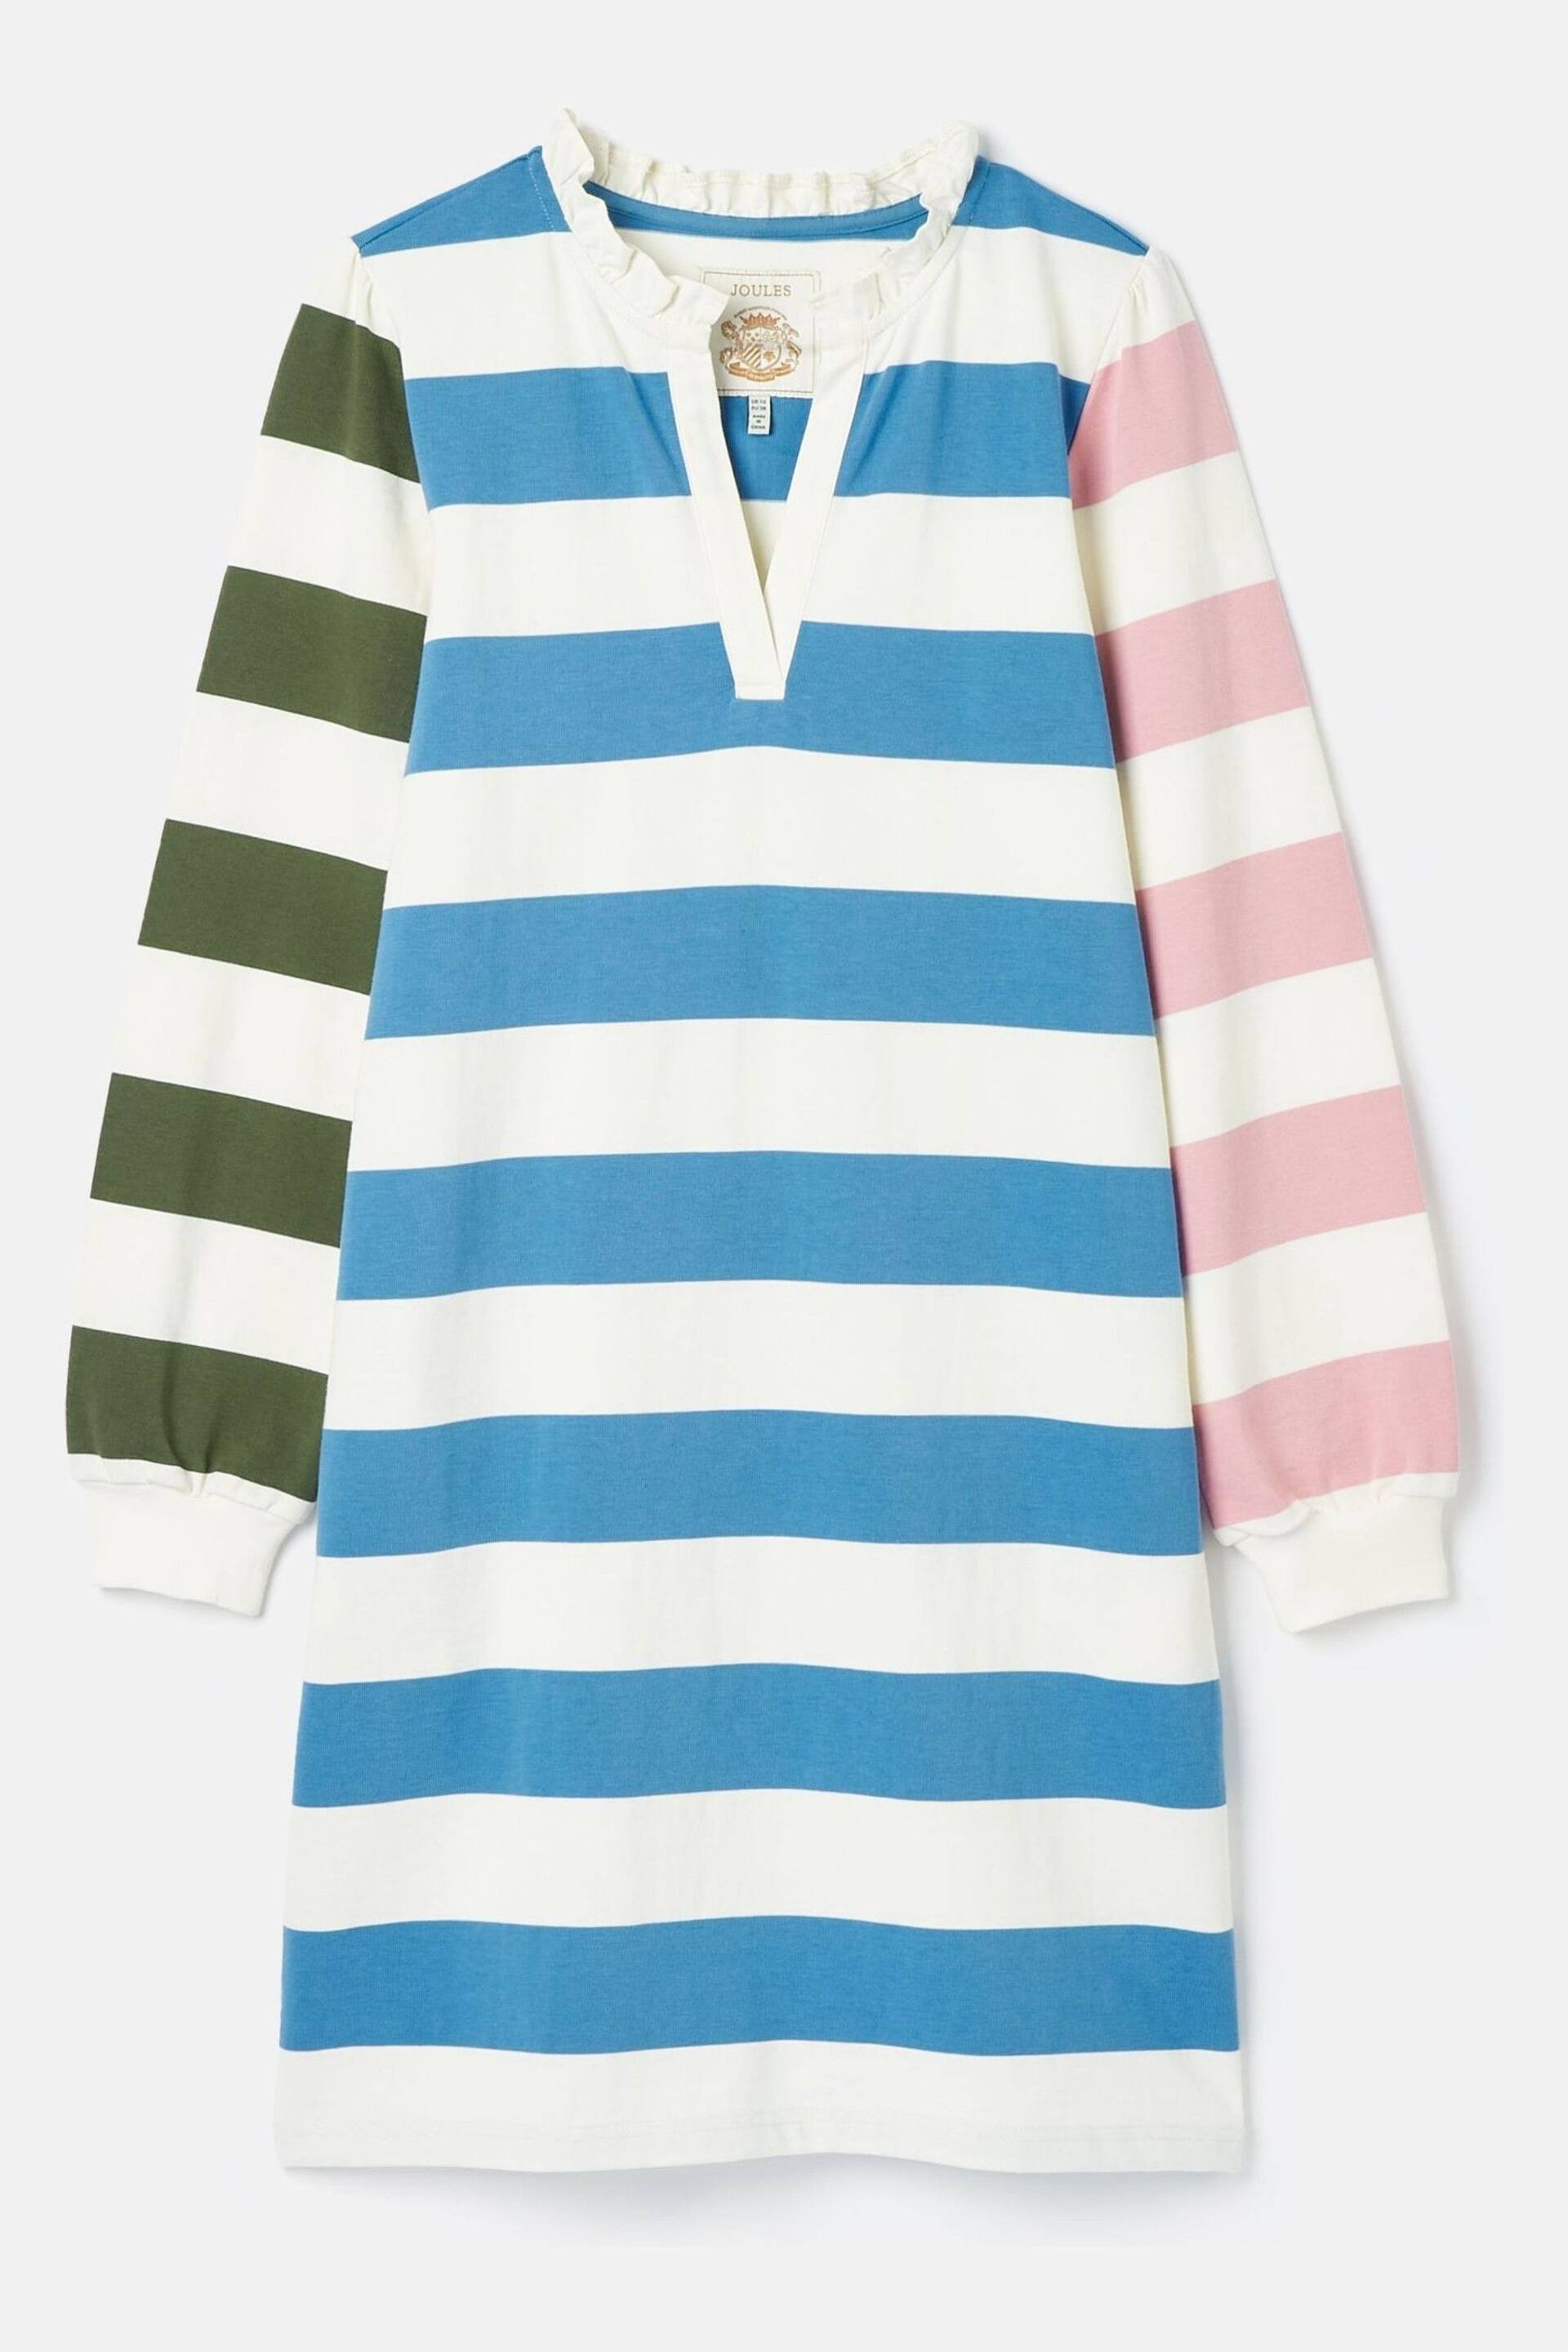 Joules Sophia Multi Striped Cotton Rugby Shirt Dress - Image 6 of 6